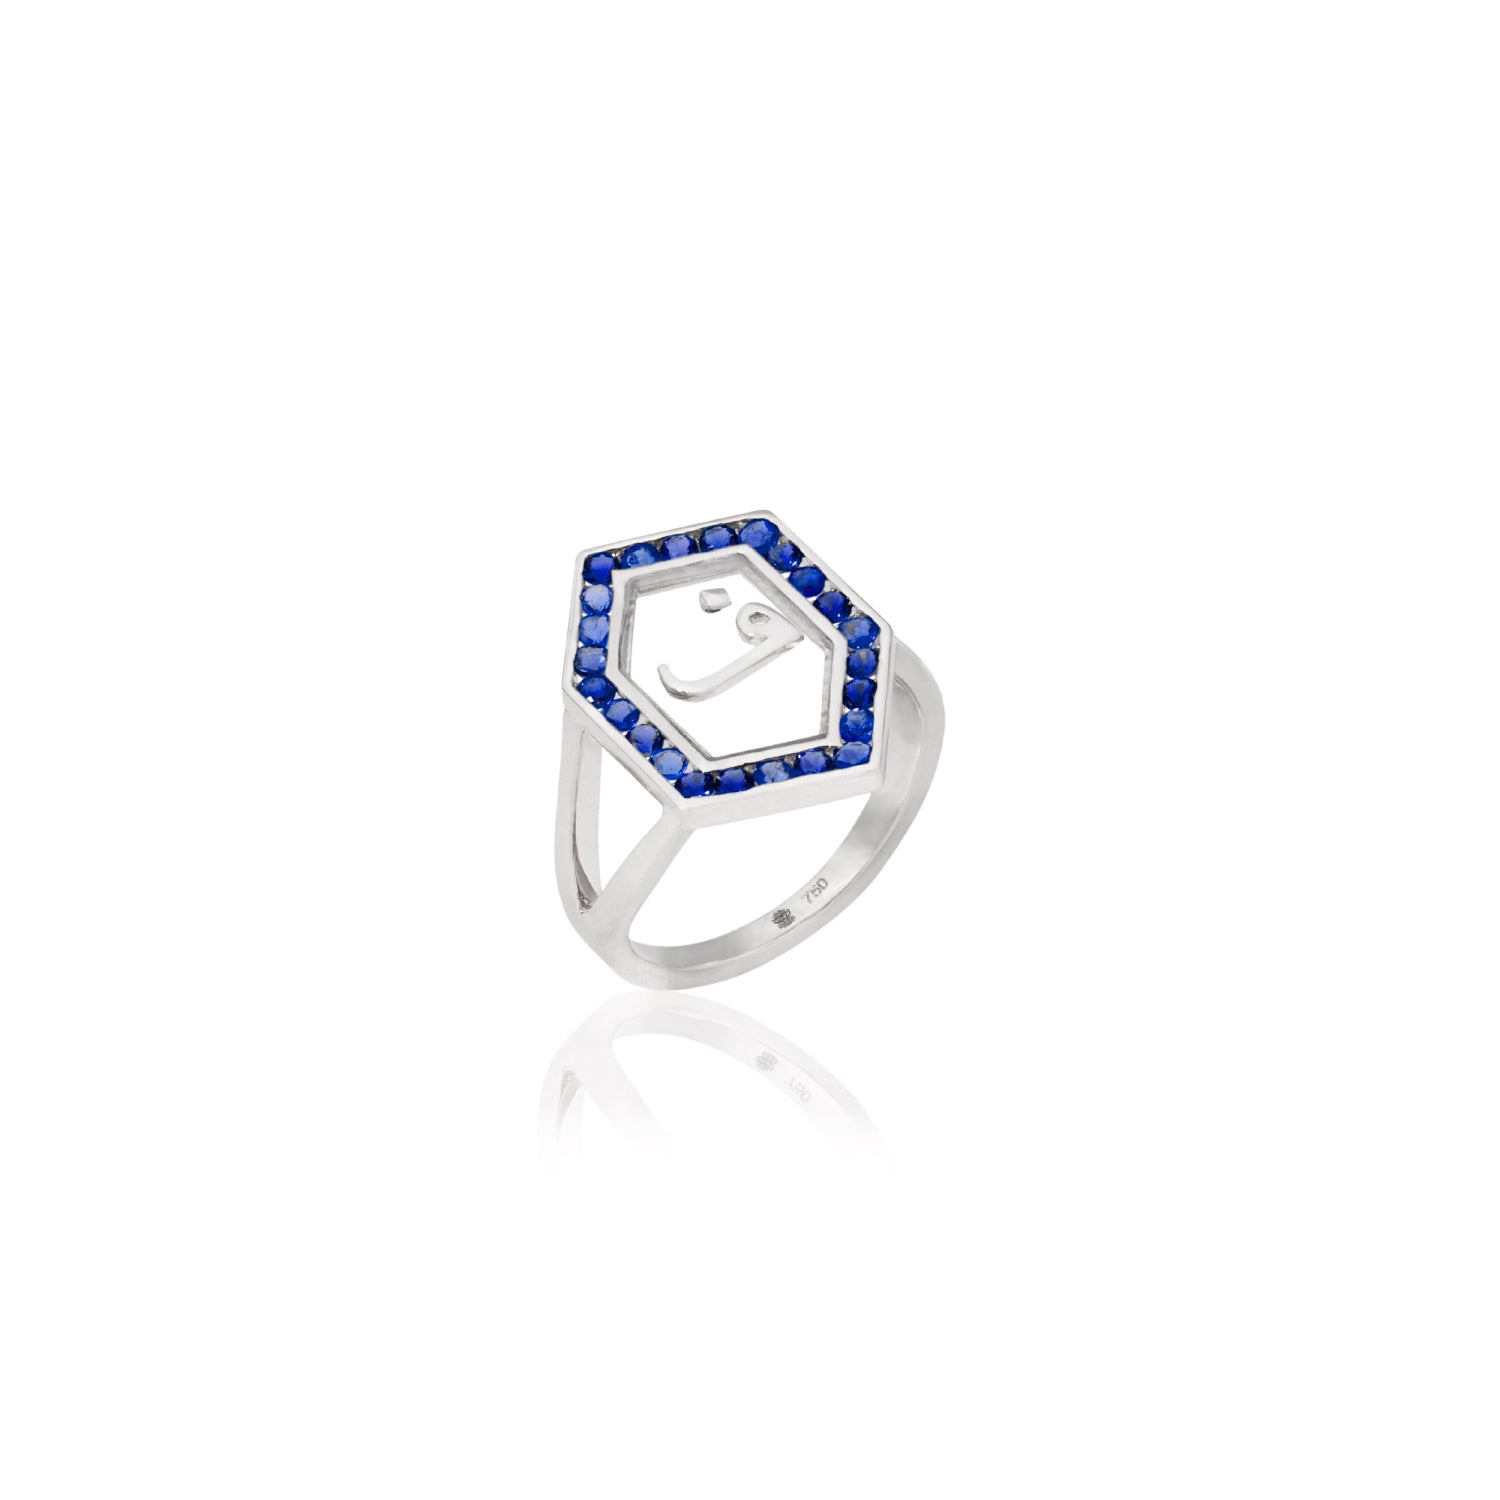 Qamoos 1.0 Letter ف Sapphire Ring in White Gold